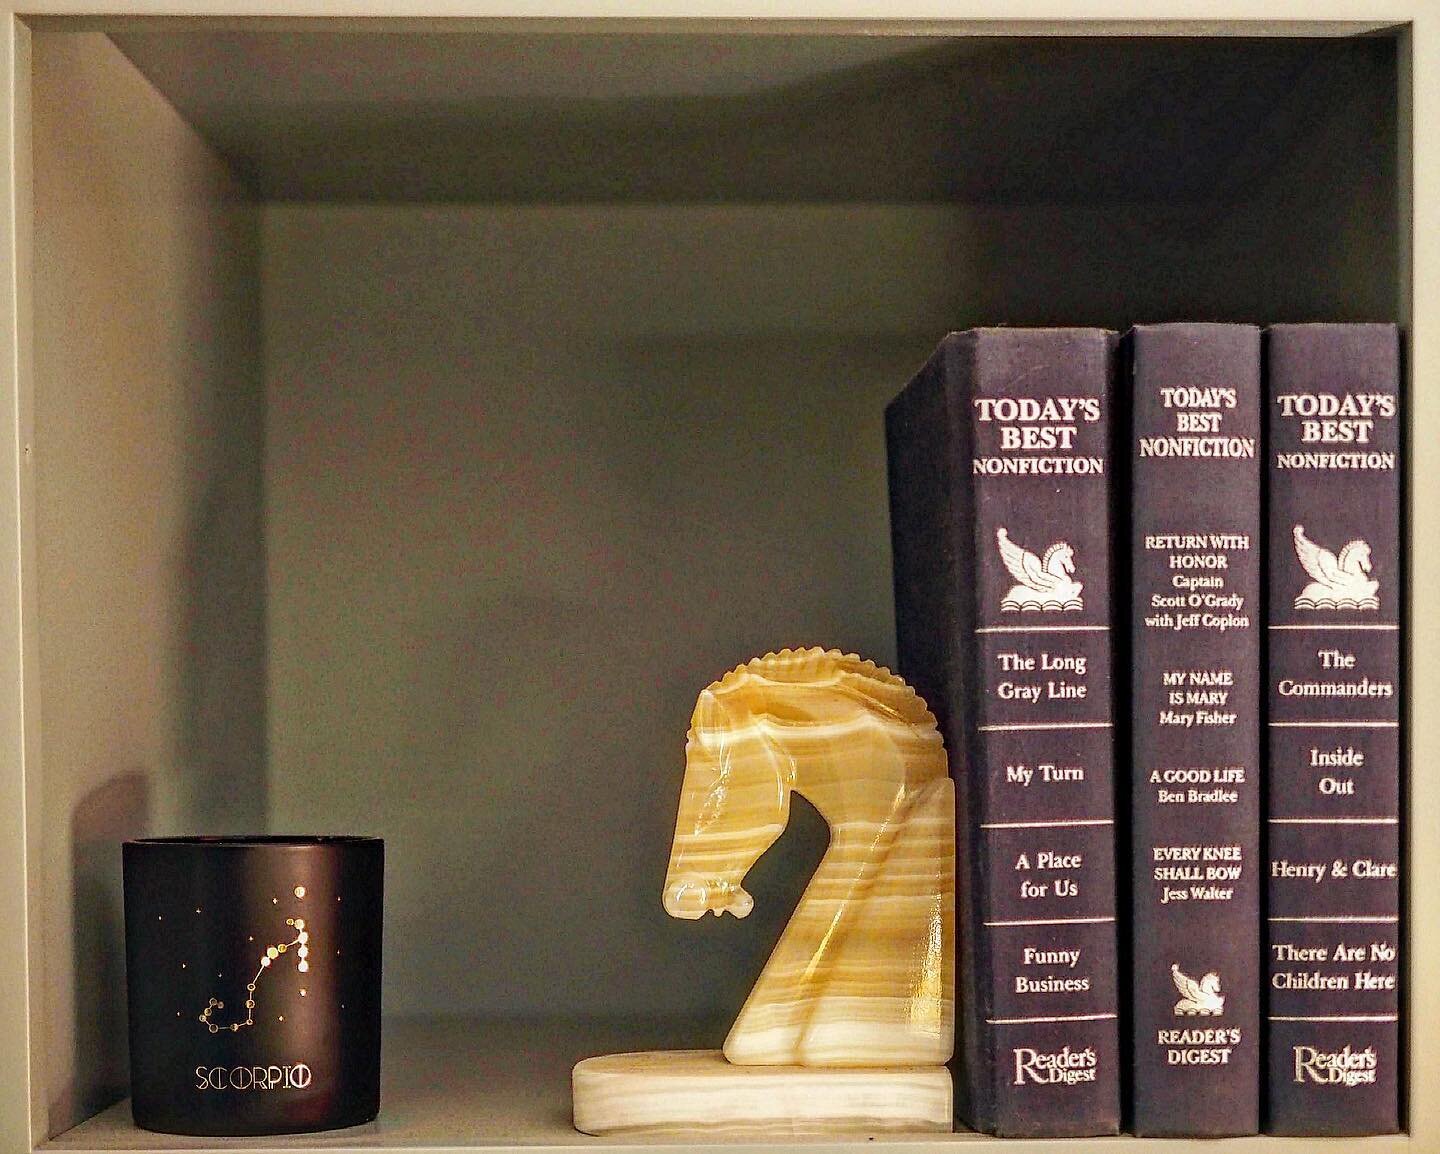 #shelfiesunday Here&rsquo;s a little cubby in my bookshelf. I love this horse bookend so much. The Scorpio candle was from a friend. 

What&rsquo;s your sign? Do you believe zodiacs say something about you? 

#airplanegames #harlequinbooks #harlequin